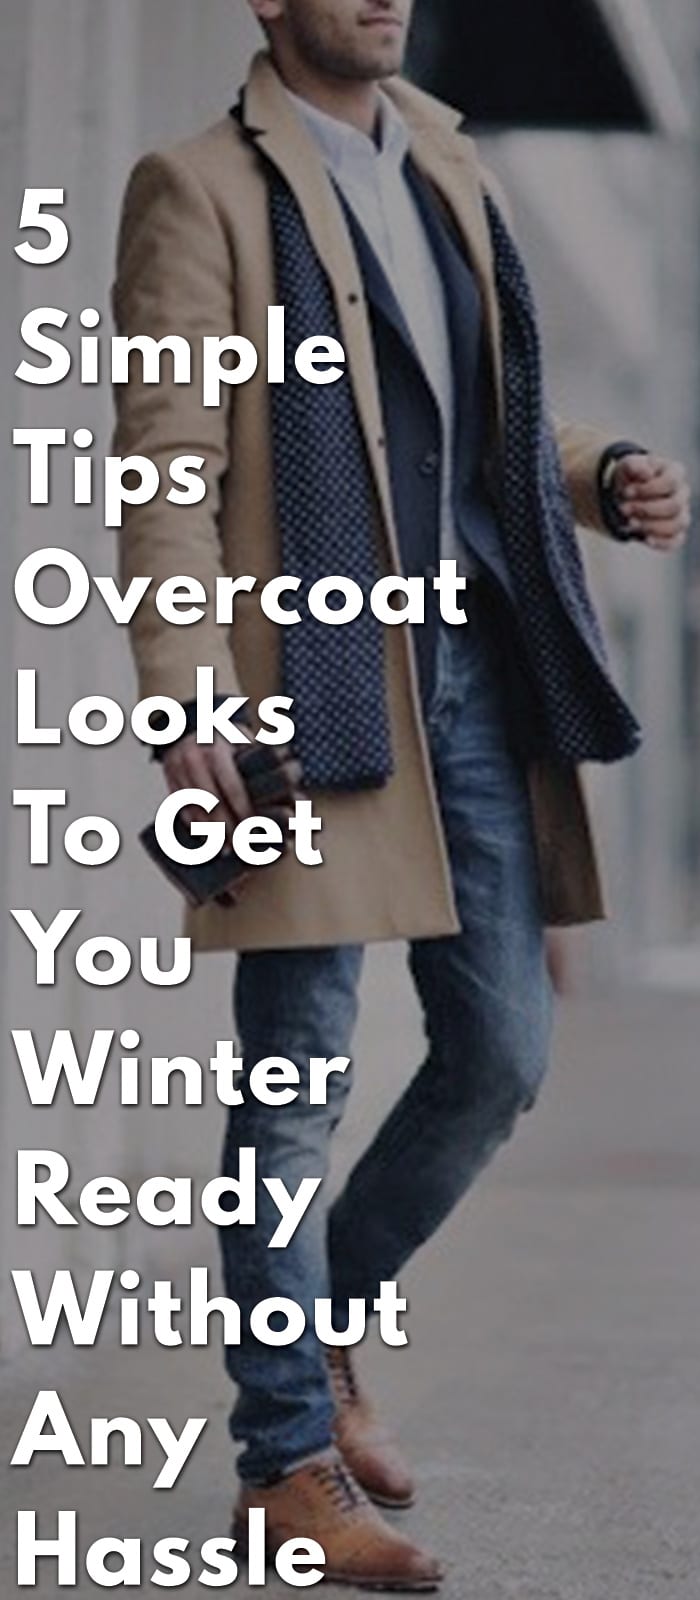 5-Simple-Tips-Overcoat-Looks-To-Get-You-Winter-Ready-Without-Any-Hassle